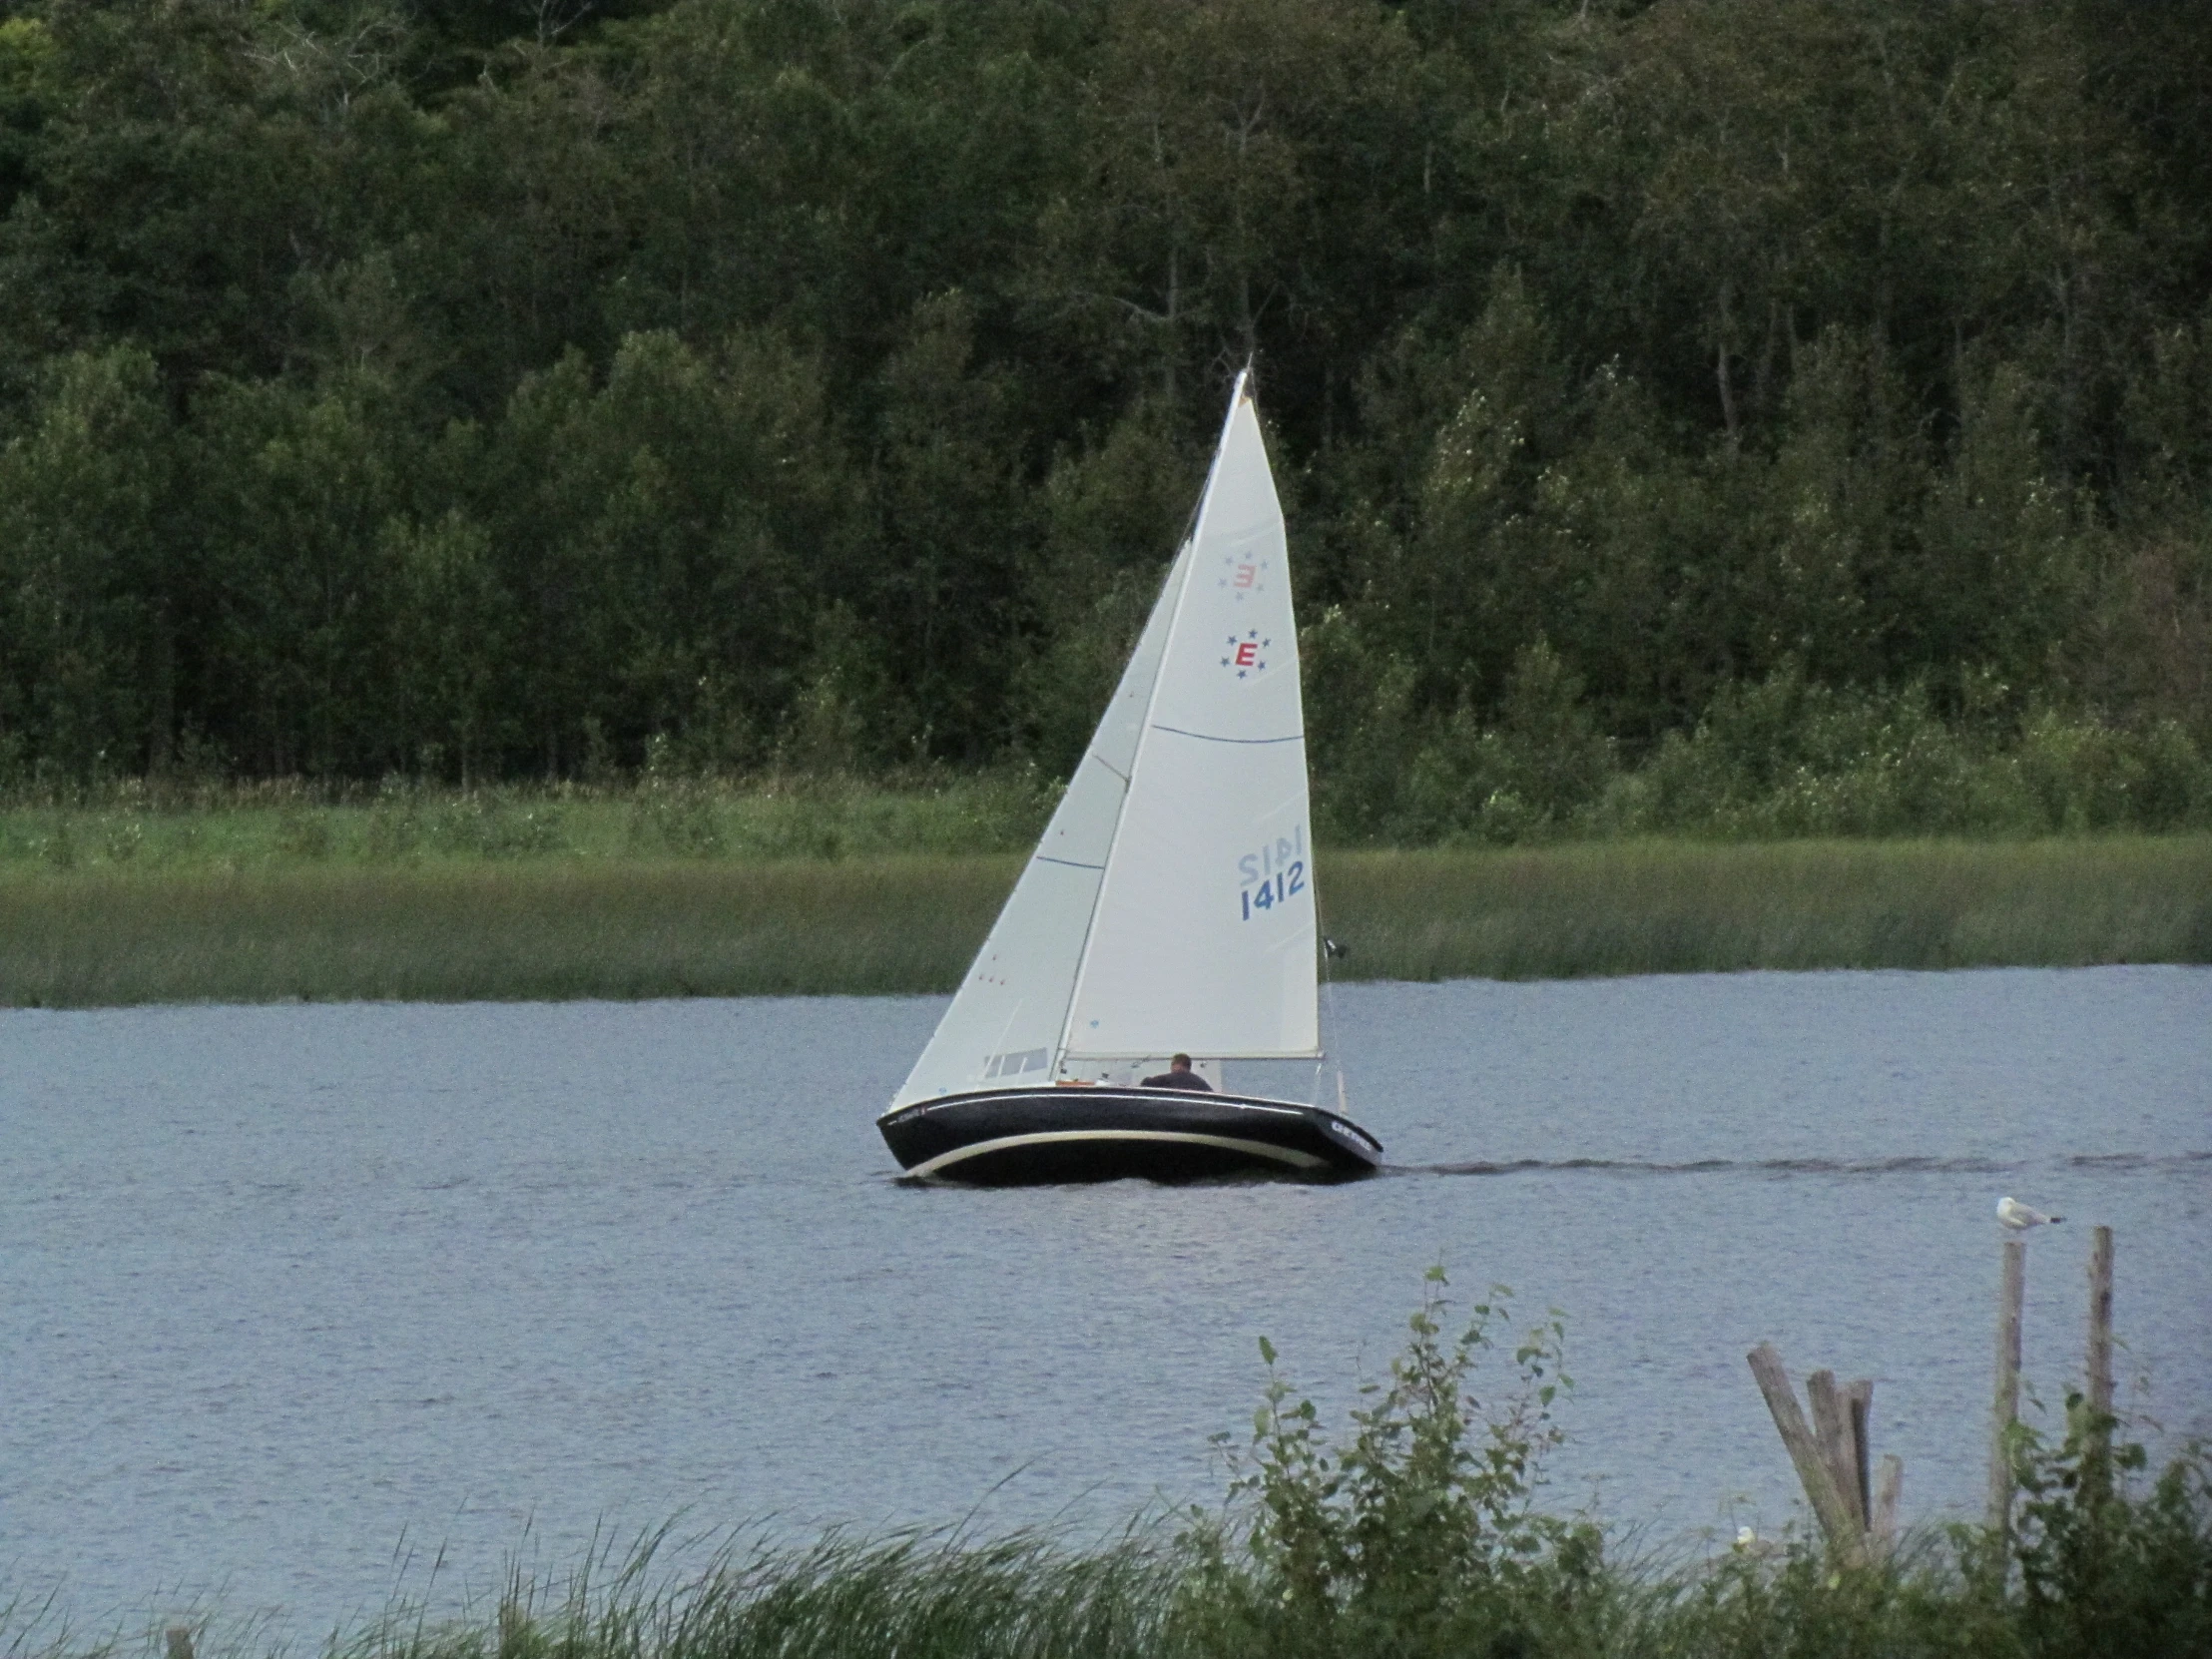 the small sailboat is in the water near the shore